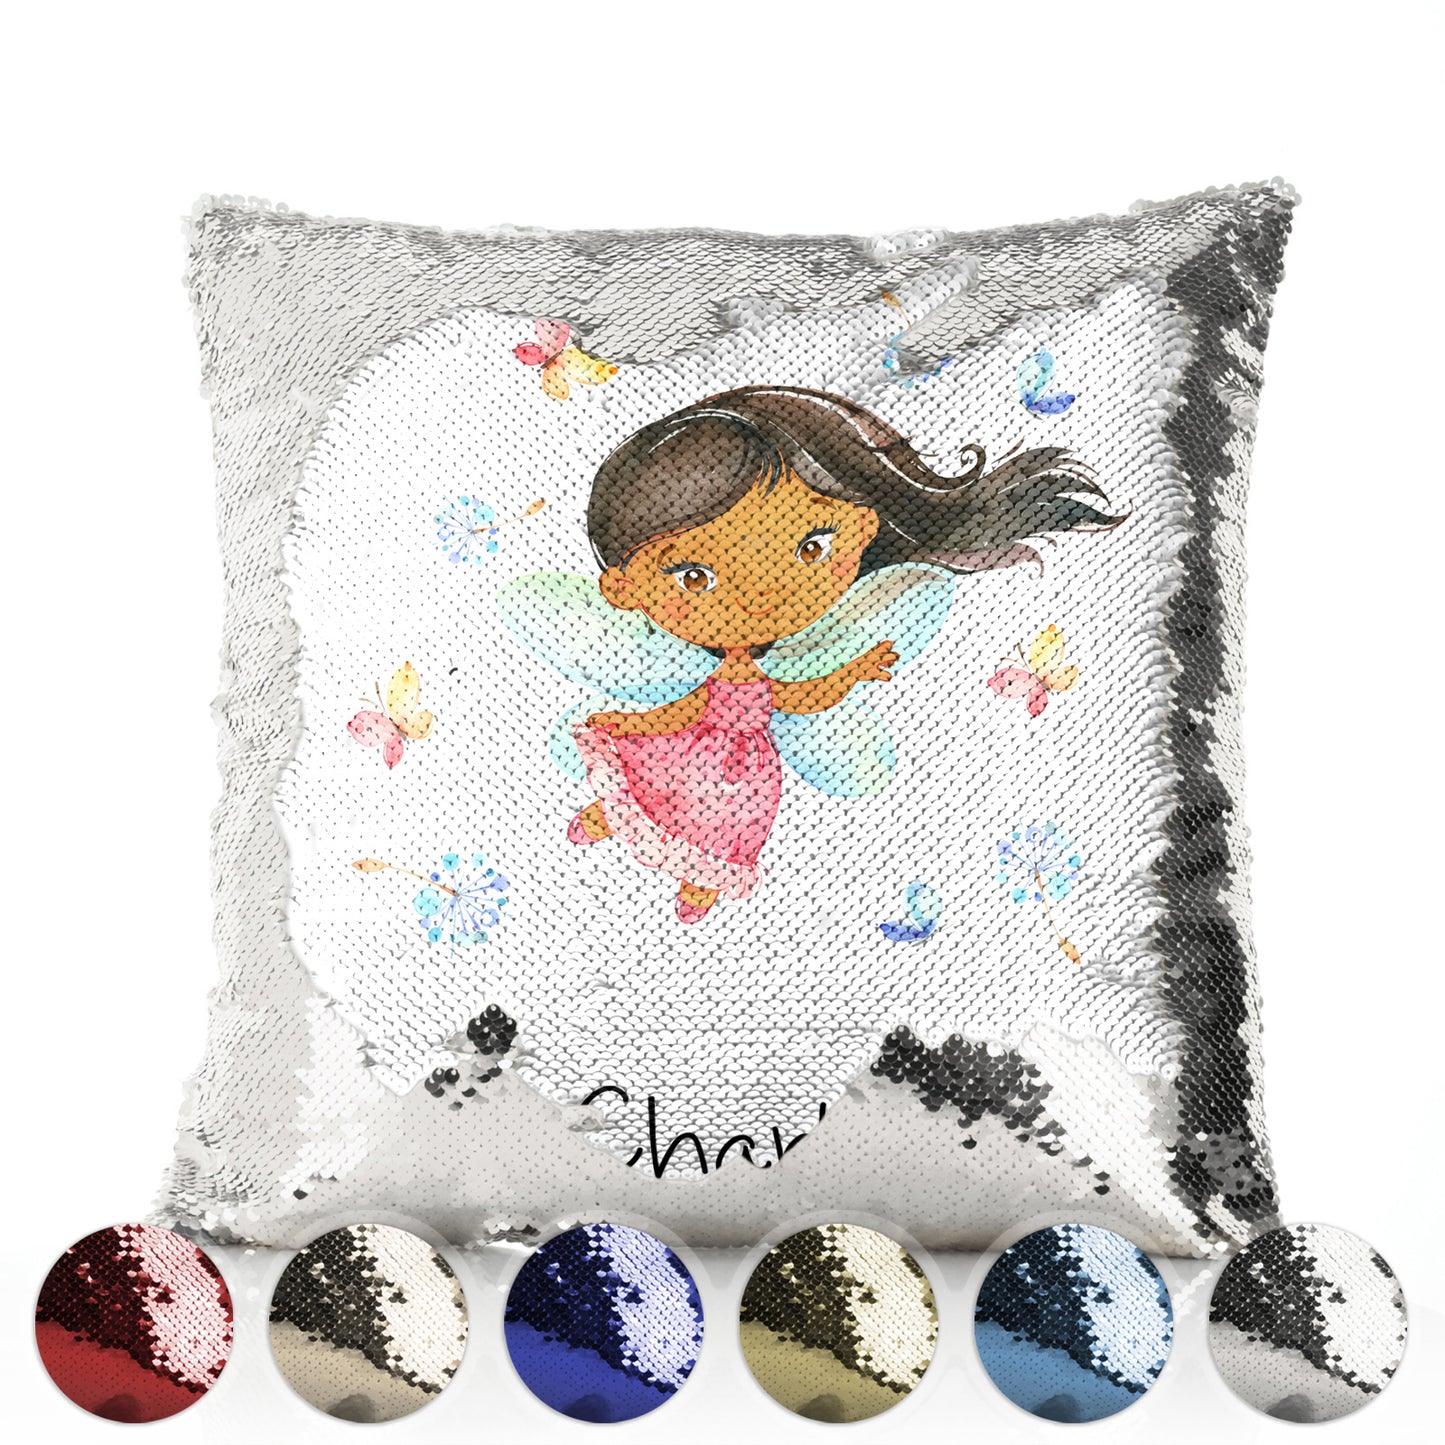 Personalised Sequin Cushion with Cute Text and Butterfly Flower Pink Dress Fairy